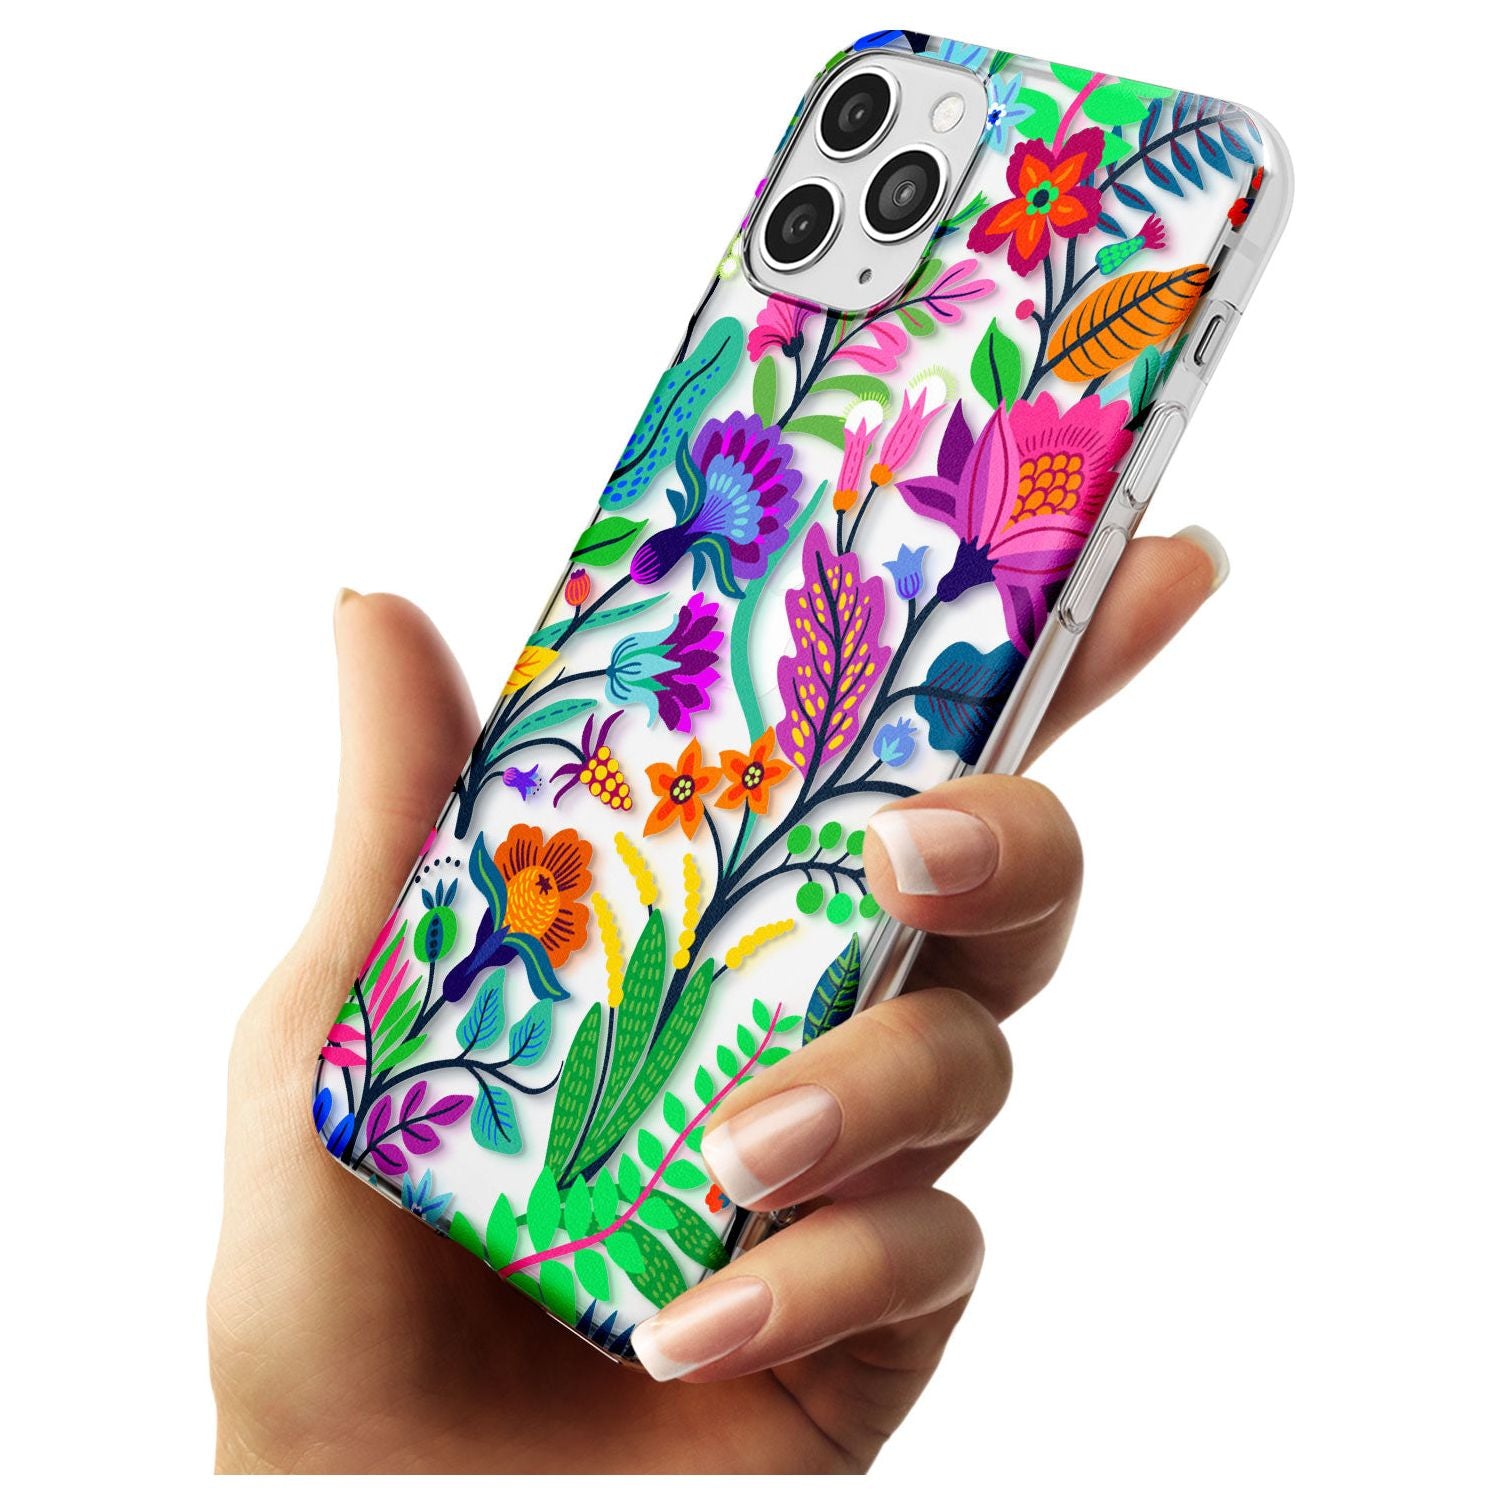 Floral Vibe Slim TPU Phone Case for iPhone 11 Pro Max